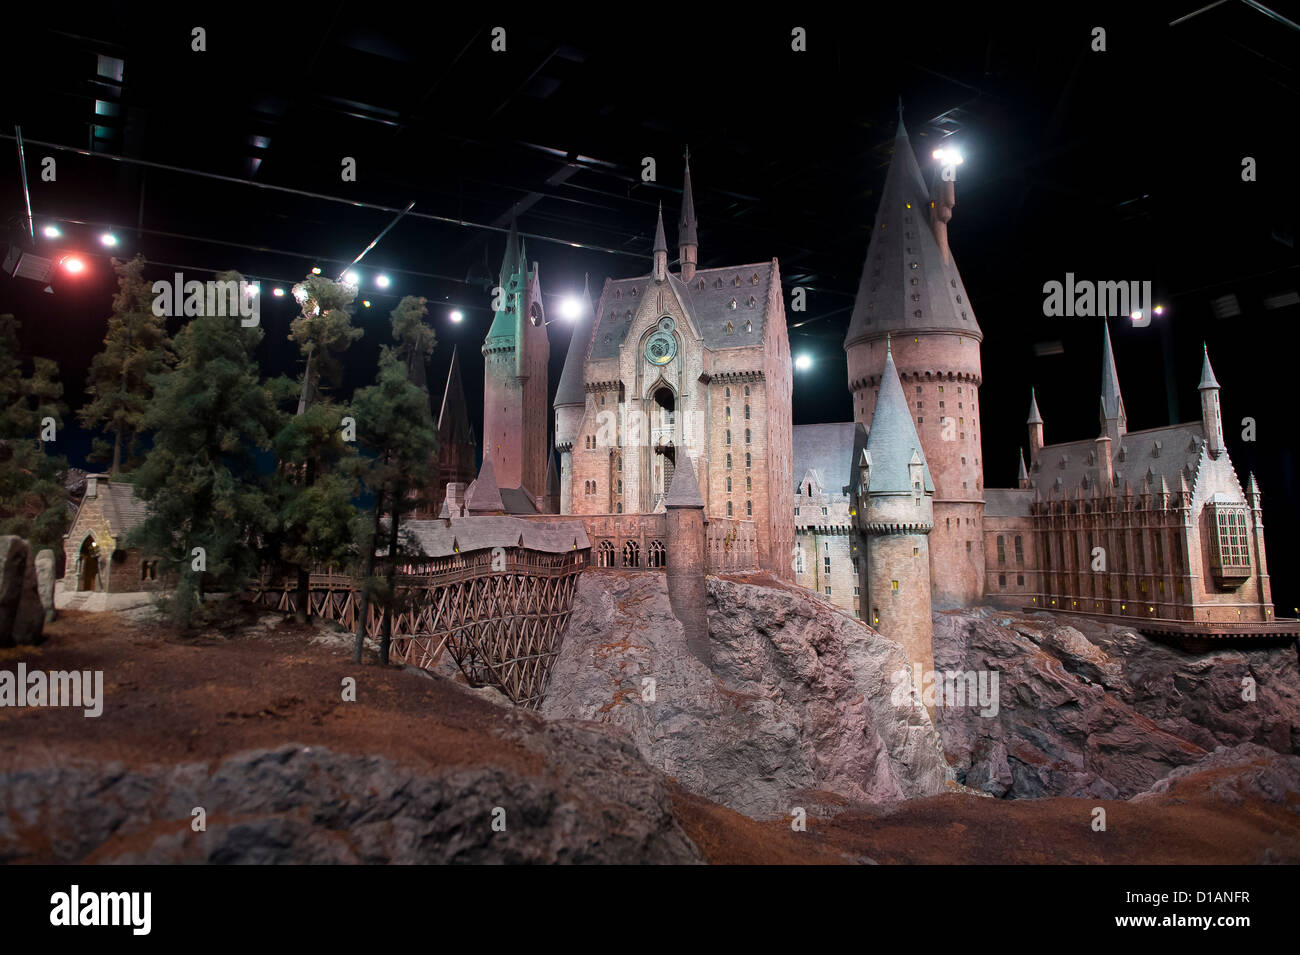 a-model-of-hogwarts-castle-from-the-harry-potter-film-series-is-unveiled-D1ANFR.jpg